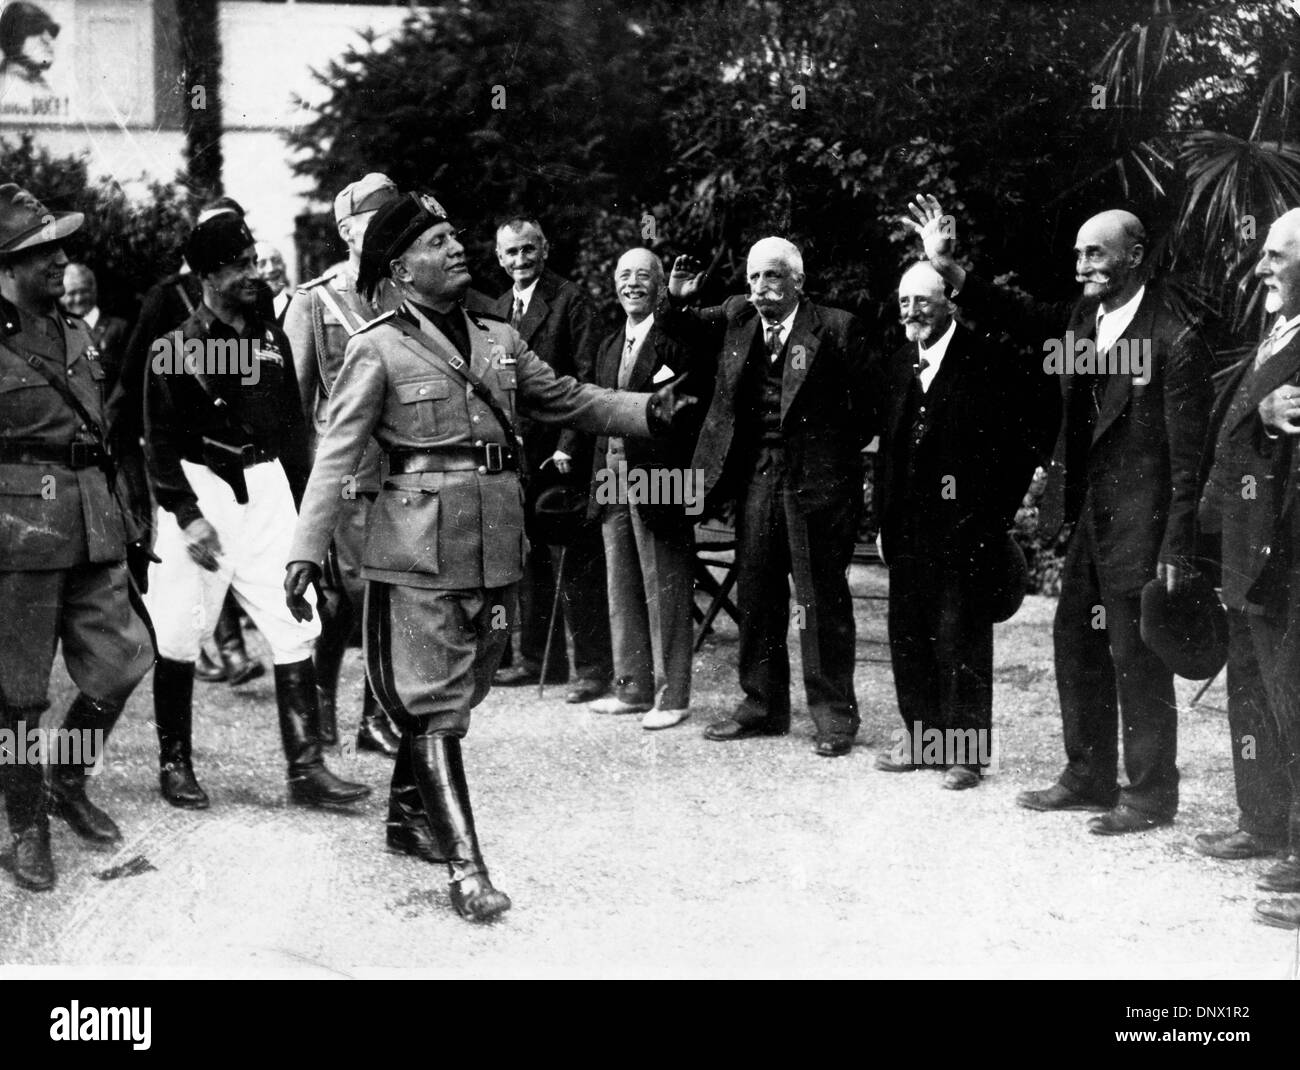 Jan. 10, 1933 - Rome, Italy - BENITO MUSSOLINI (1883-1945) the Italian dictator and leader of the Fascist movement being greeted by a group of elderly men. (Credit Image: © KEYSTONE Pictures USA/ZUMAPRESS.com) Stock Photo